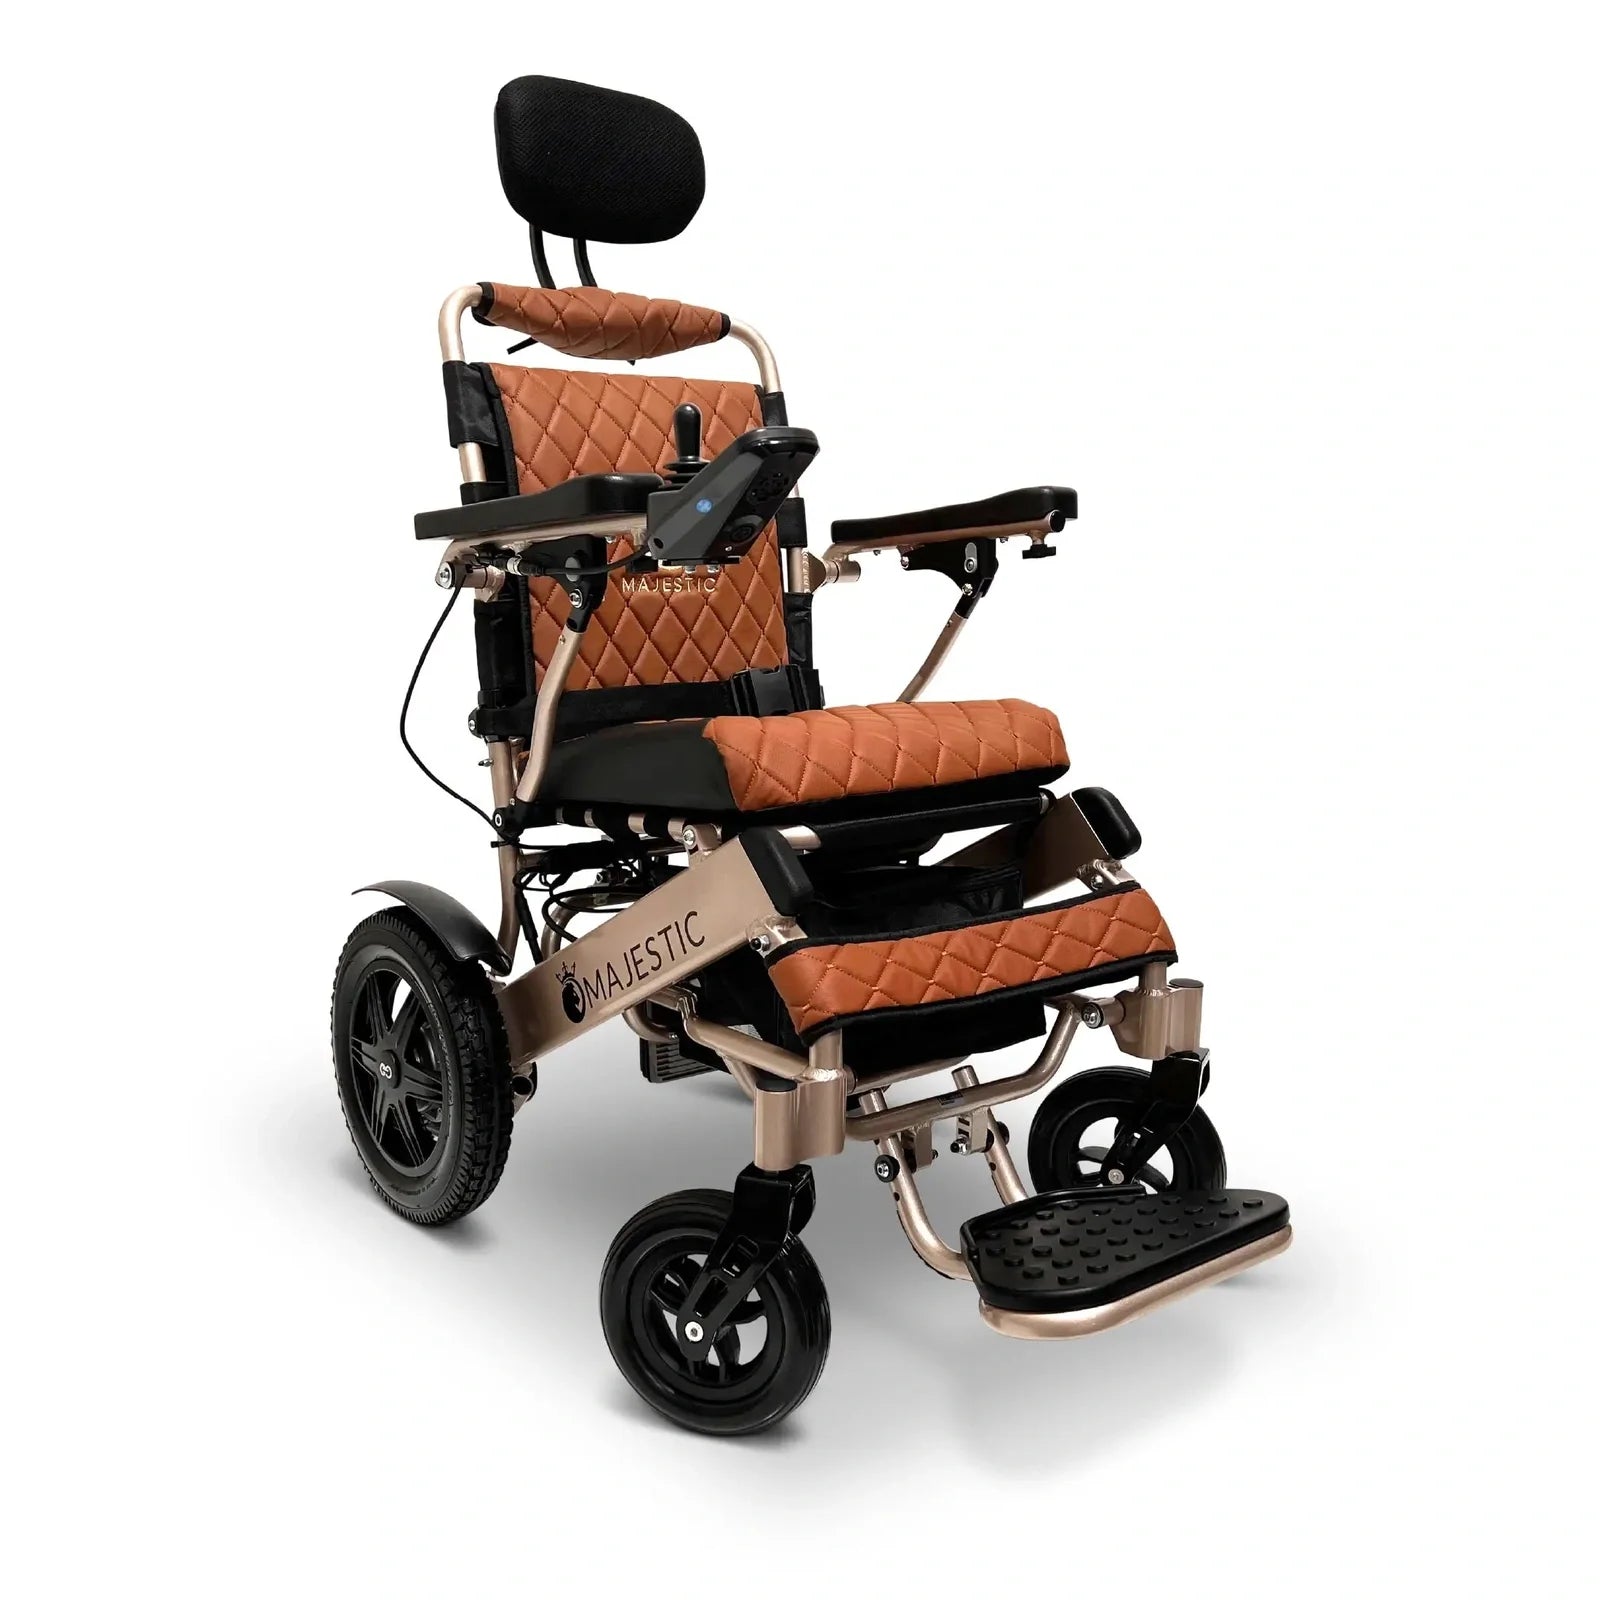 ComfyGO Majestic IQ-9000 Long Range Remote Controlled Folding Reclining Electric Wheelchair Power Wheelchairs ComfyGO Bronze Taba Auto Reclining